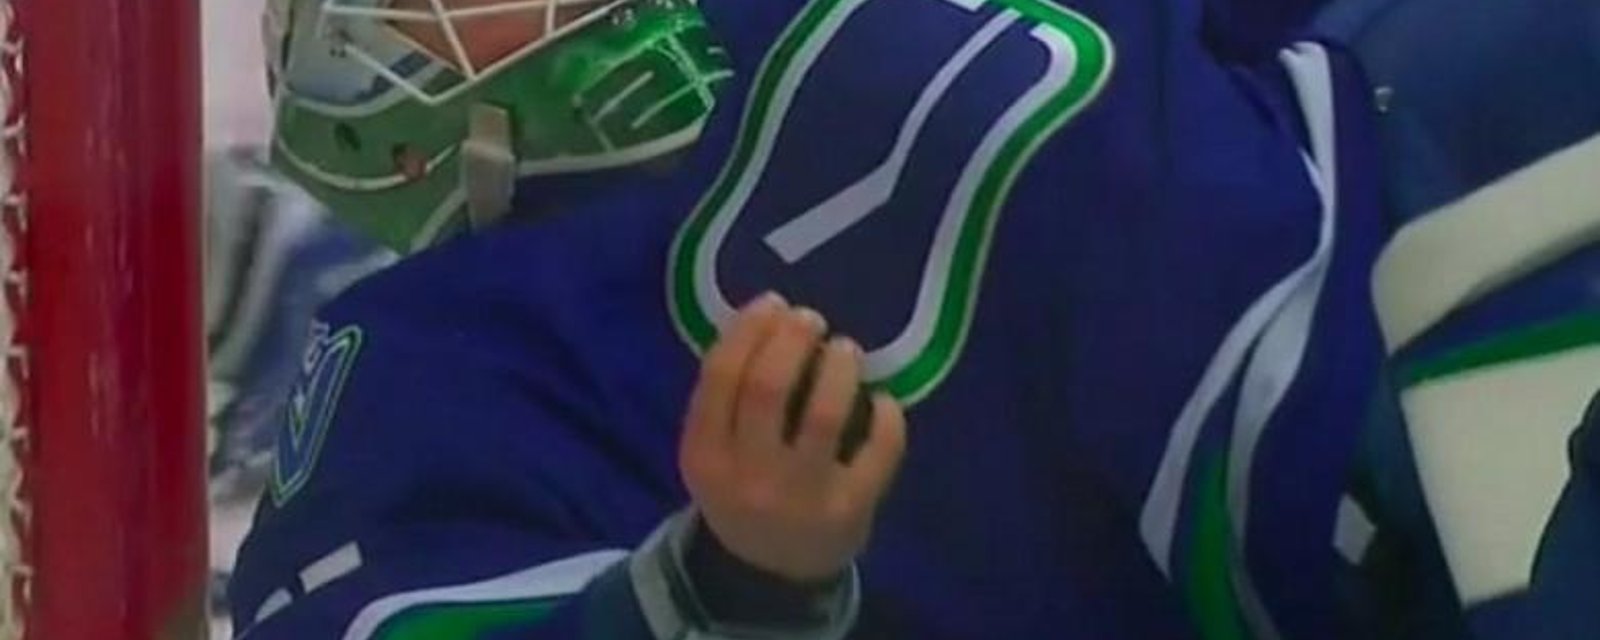 Markstrom loses his glove, makes an incredible bare-handed save.